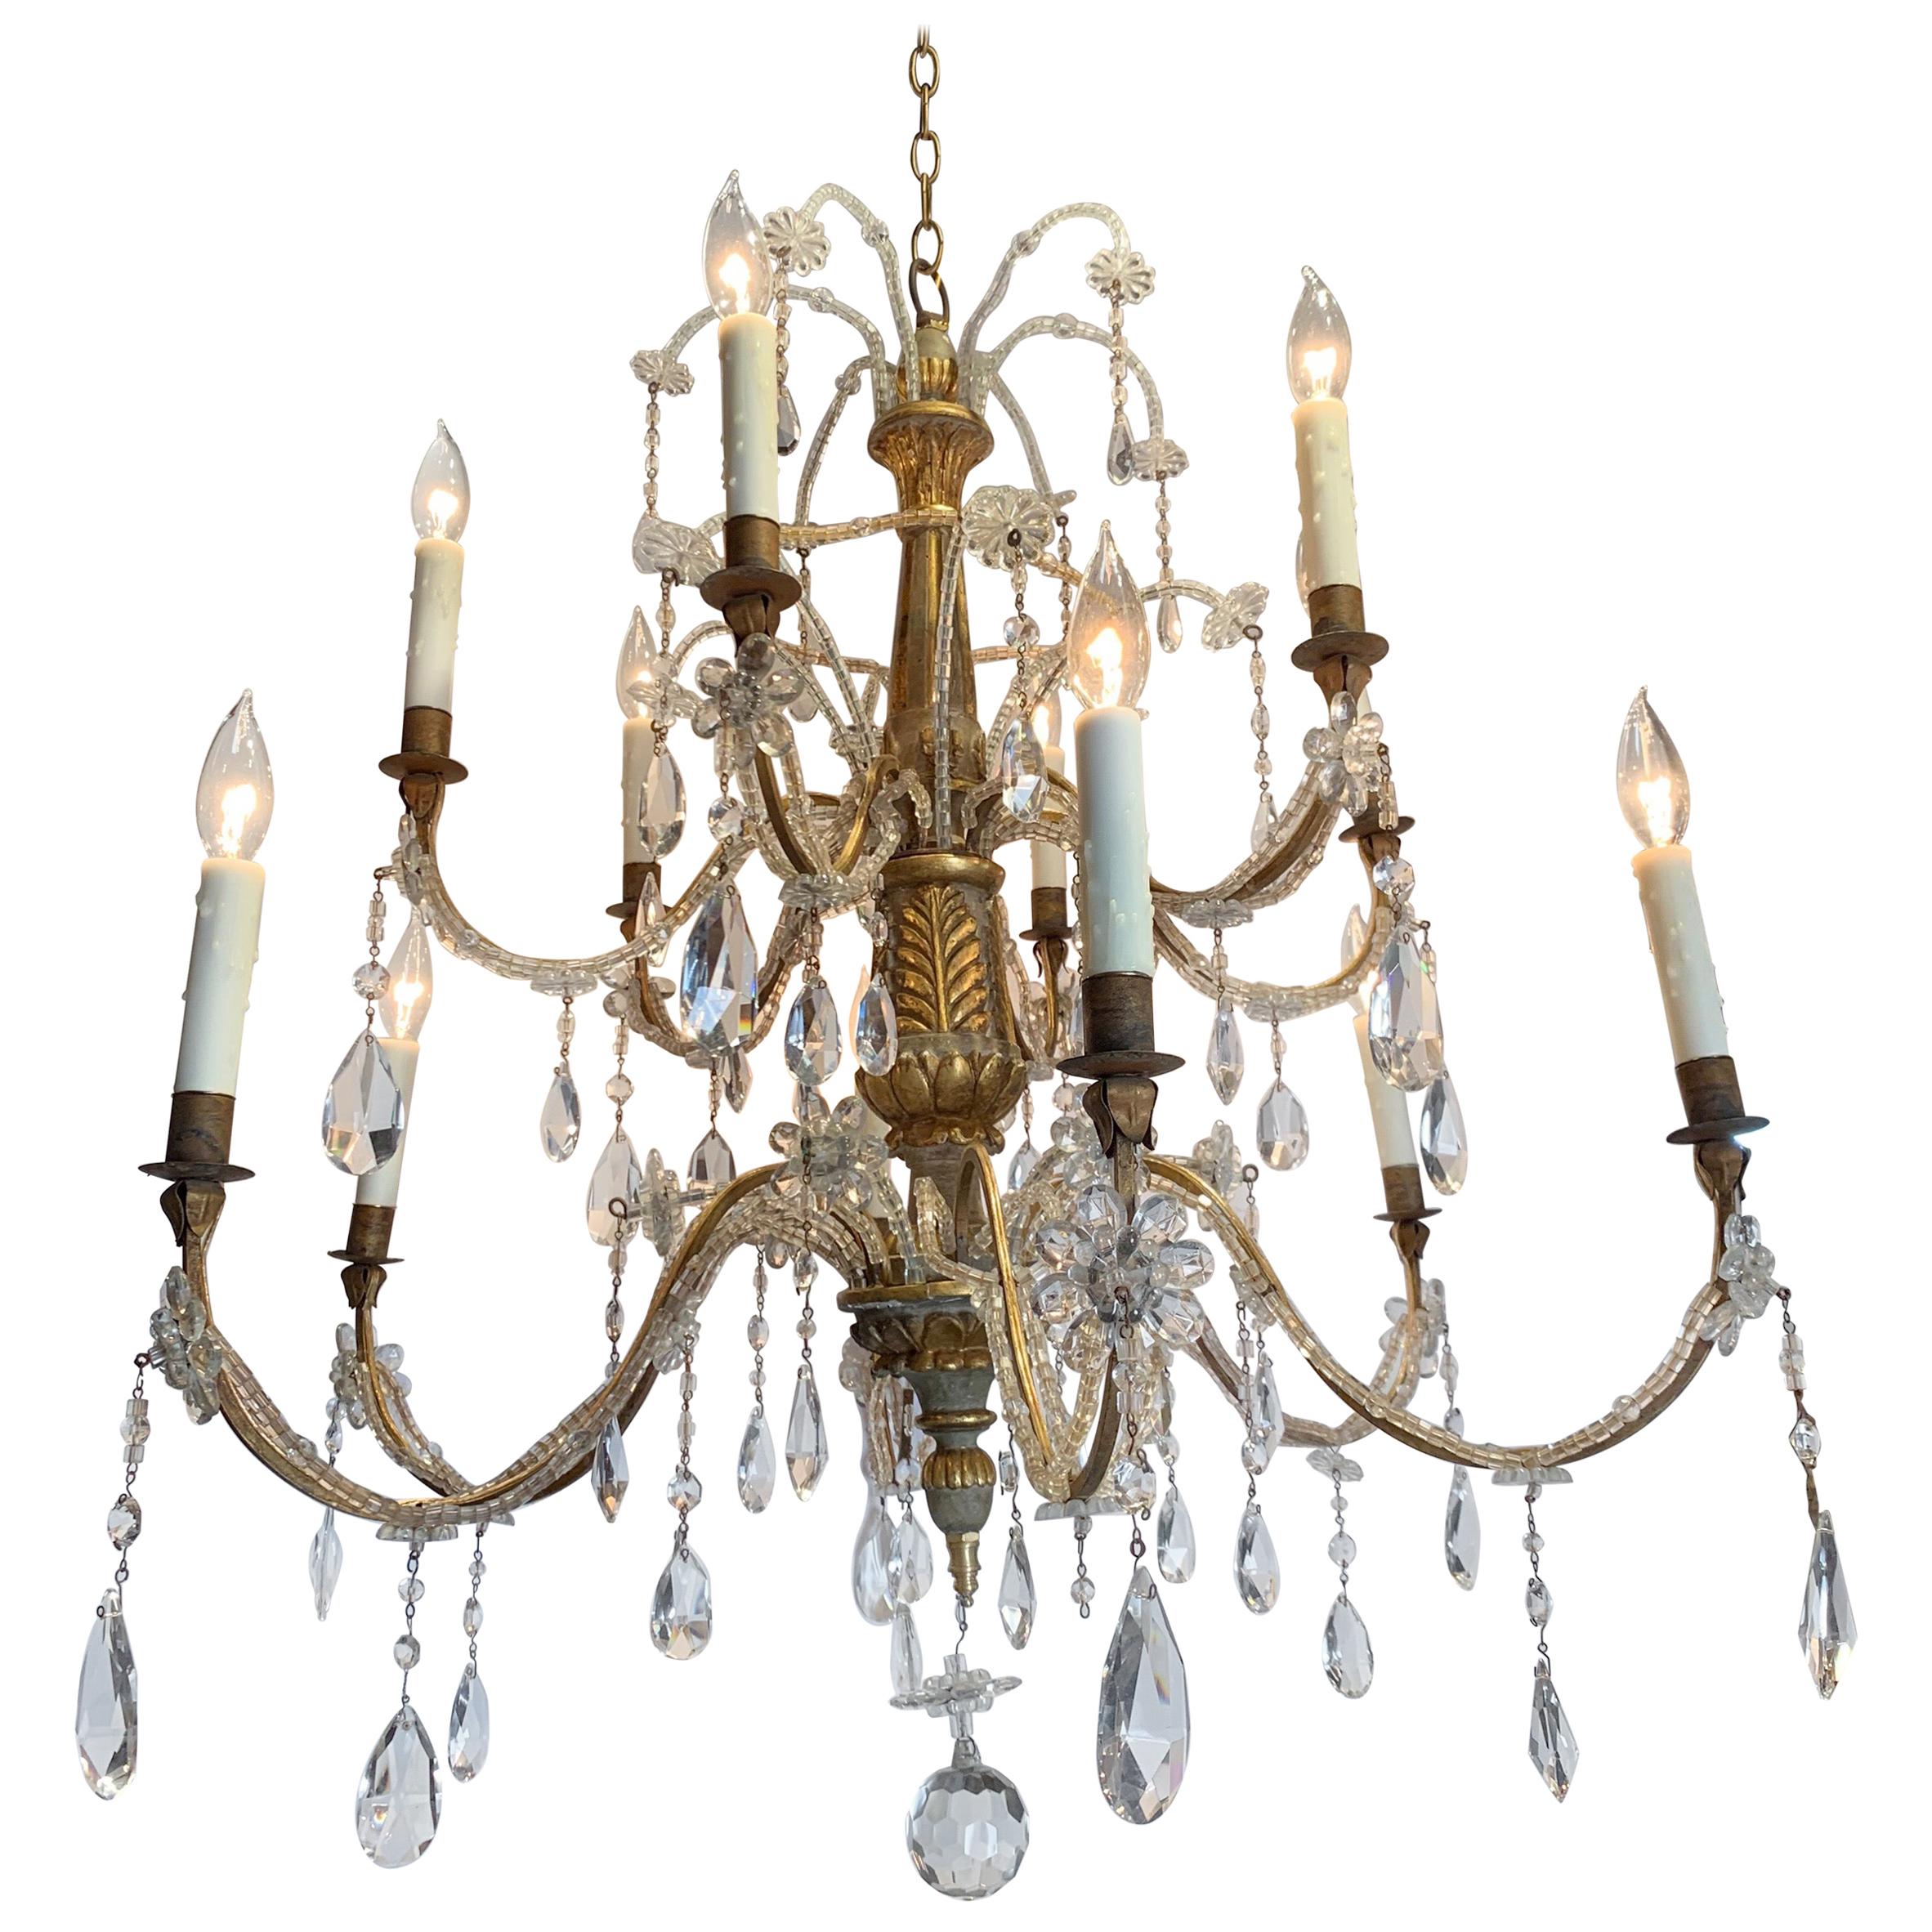 Early 19th Century Italian Carved Wood and Beaded Chandelier